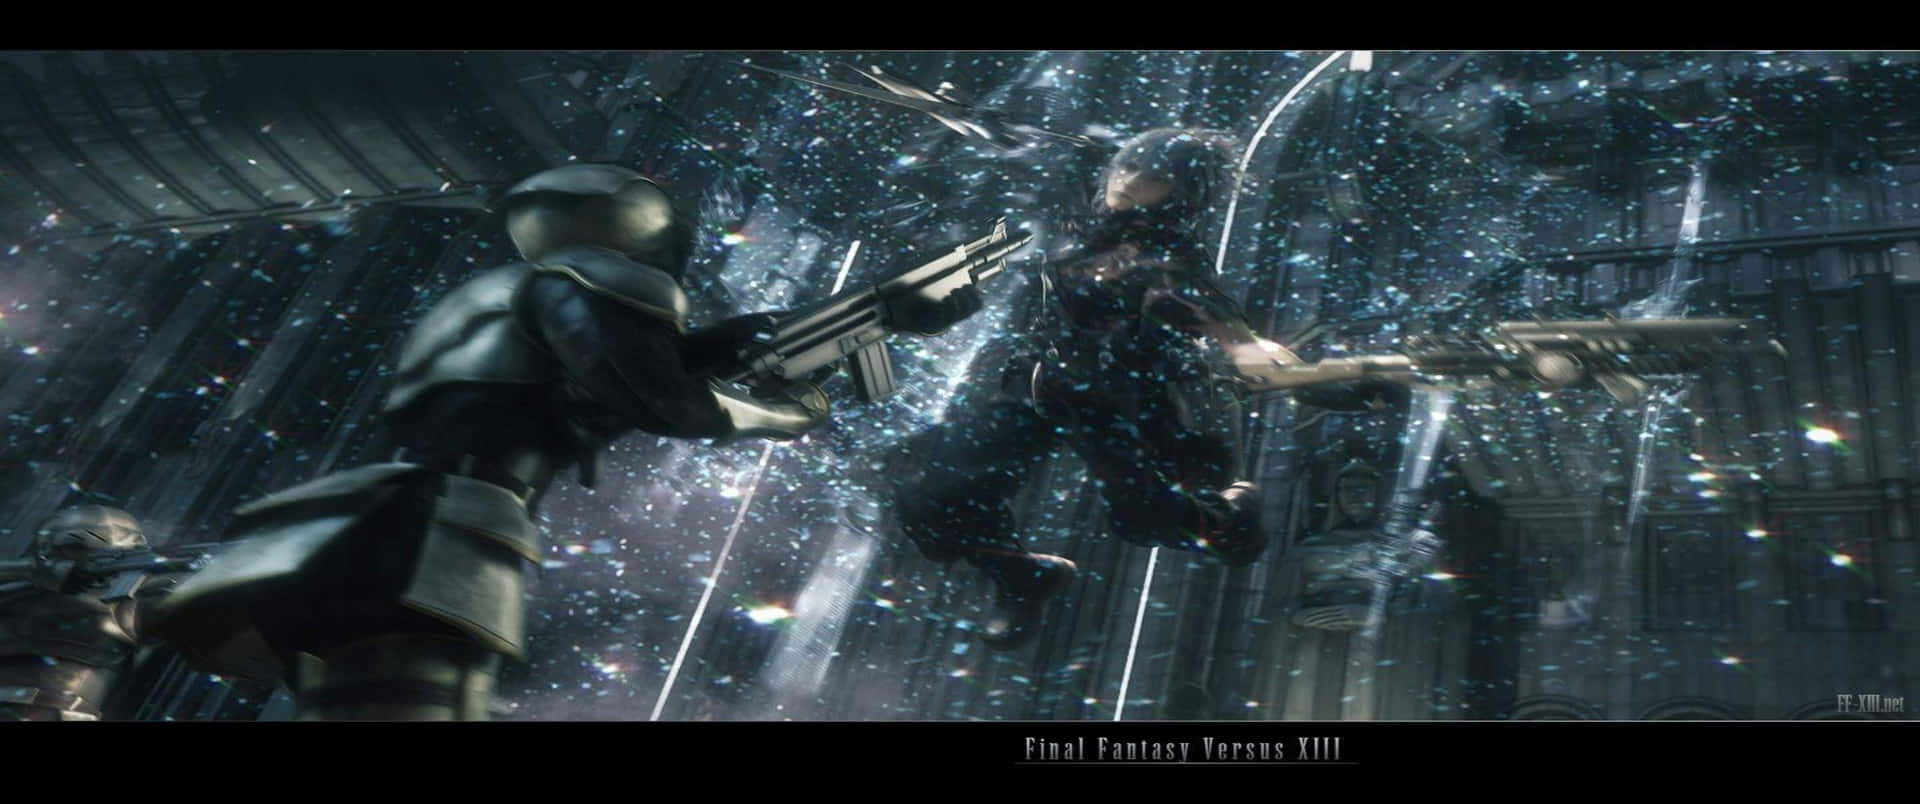 Image  Final Fantasy XV characters in action